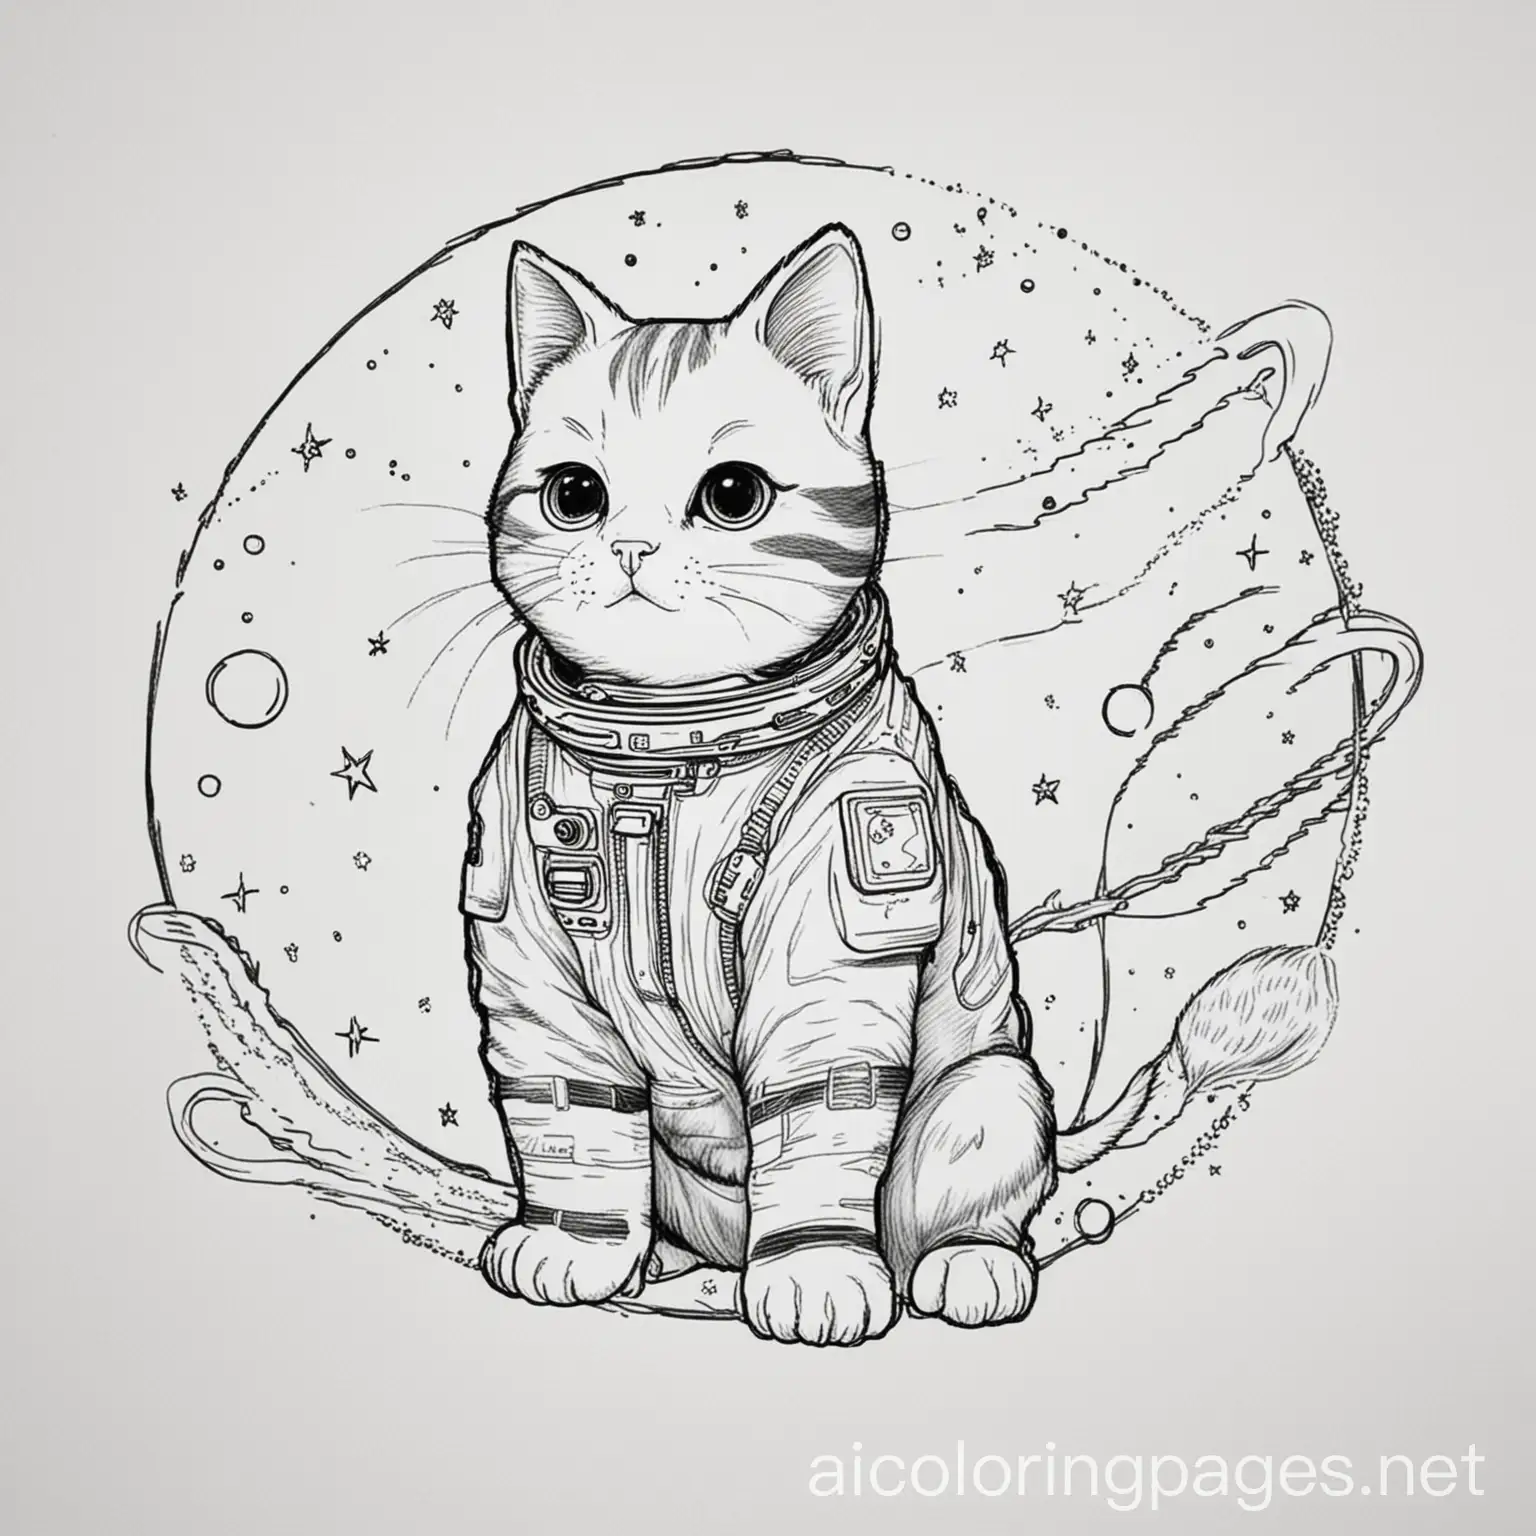 a cat at space, Coloring Page, black and white, line art, white background, Simplicity, Ample White Space. The background of the coloring page is plain white to make it easy for young children to color within the lines. The outlines of all the subjects are easy to distinguish, making it simple for kids to color without too much difficulty